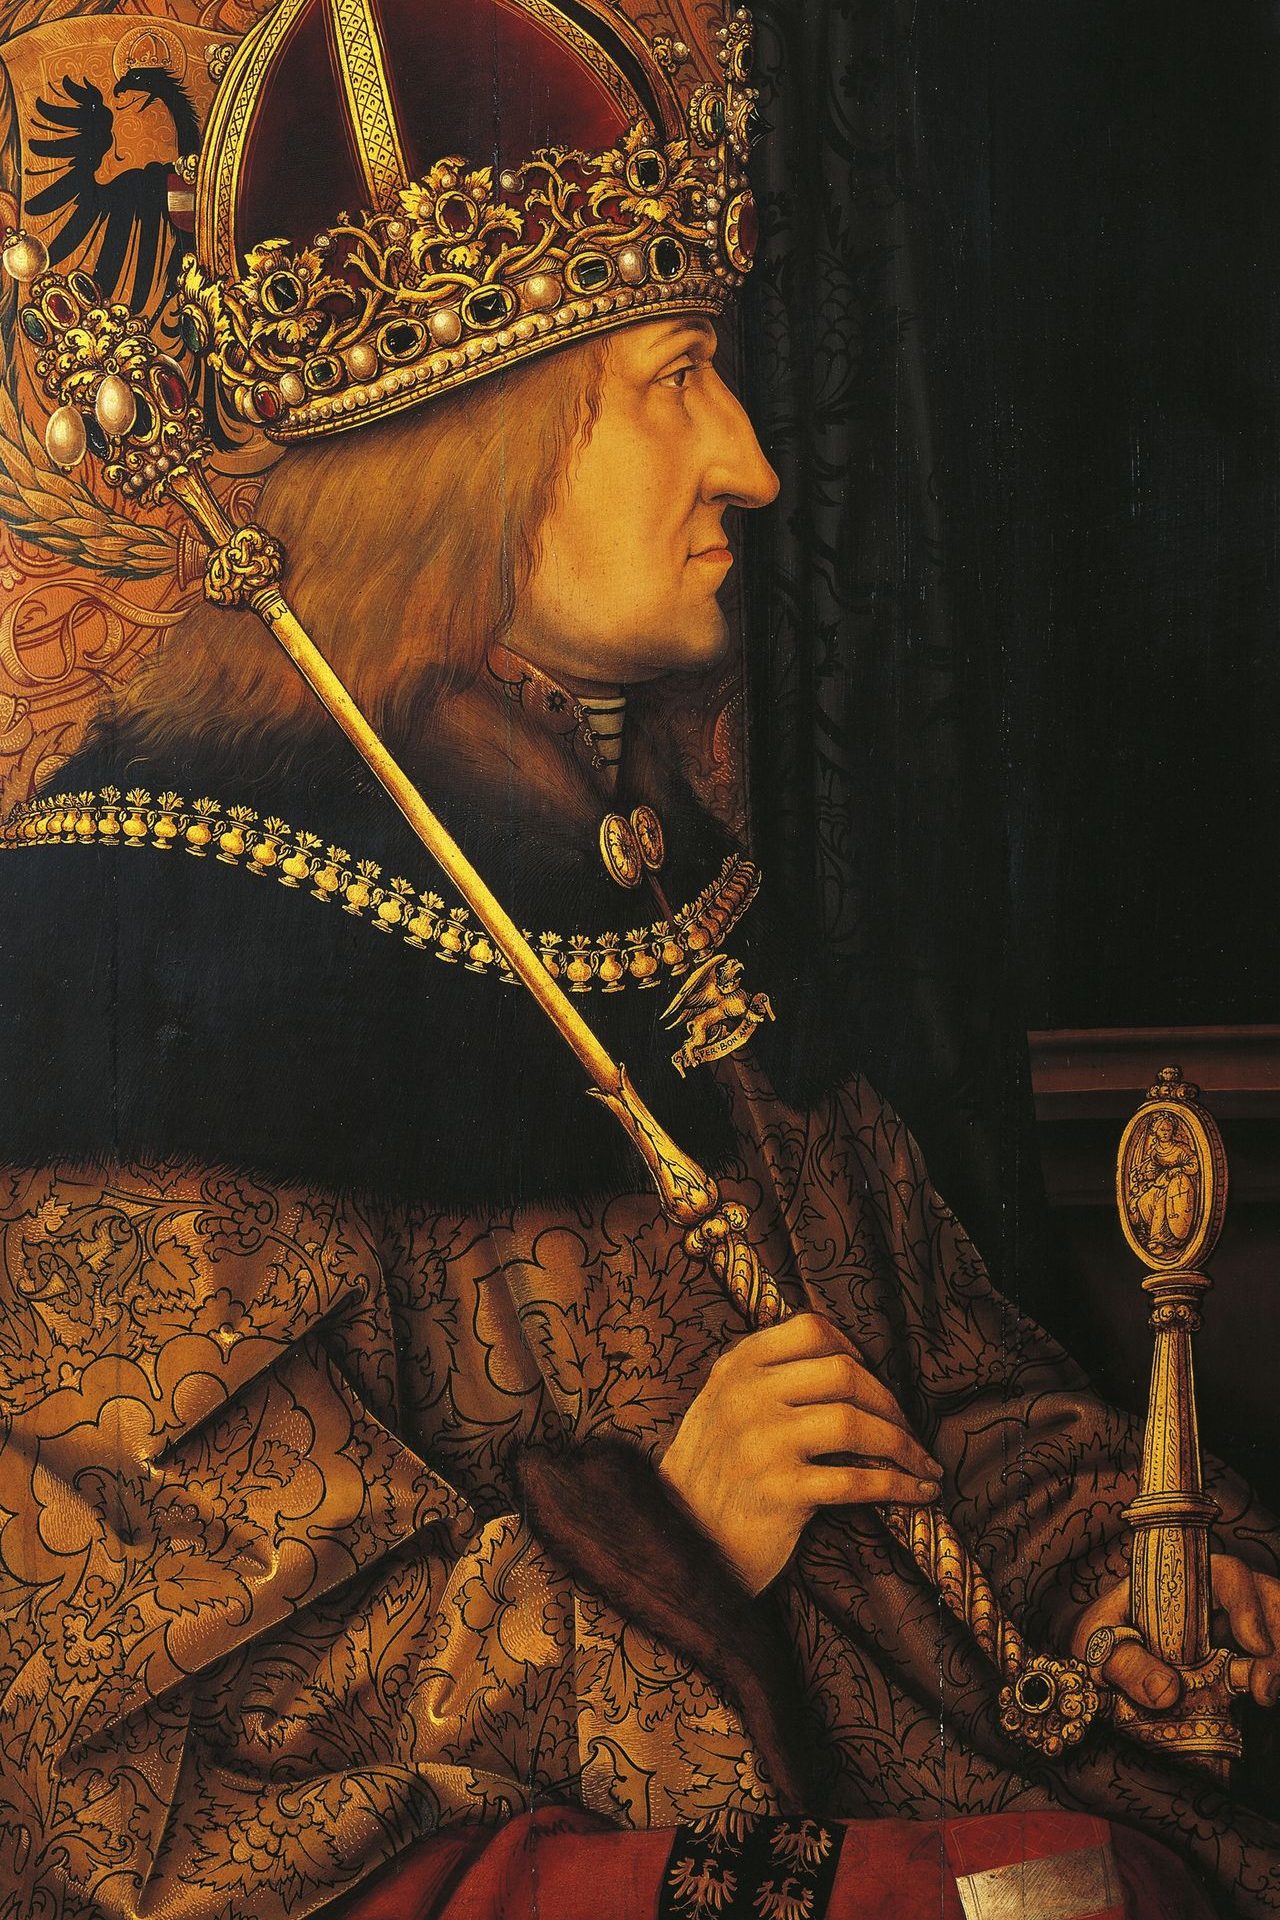 Frederick III (Holy Roman Empire, 53 years from 1440 to 1493)